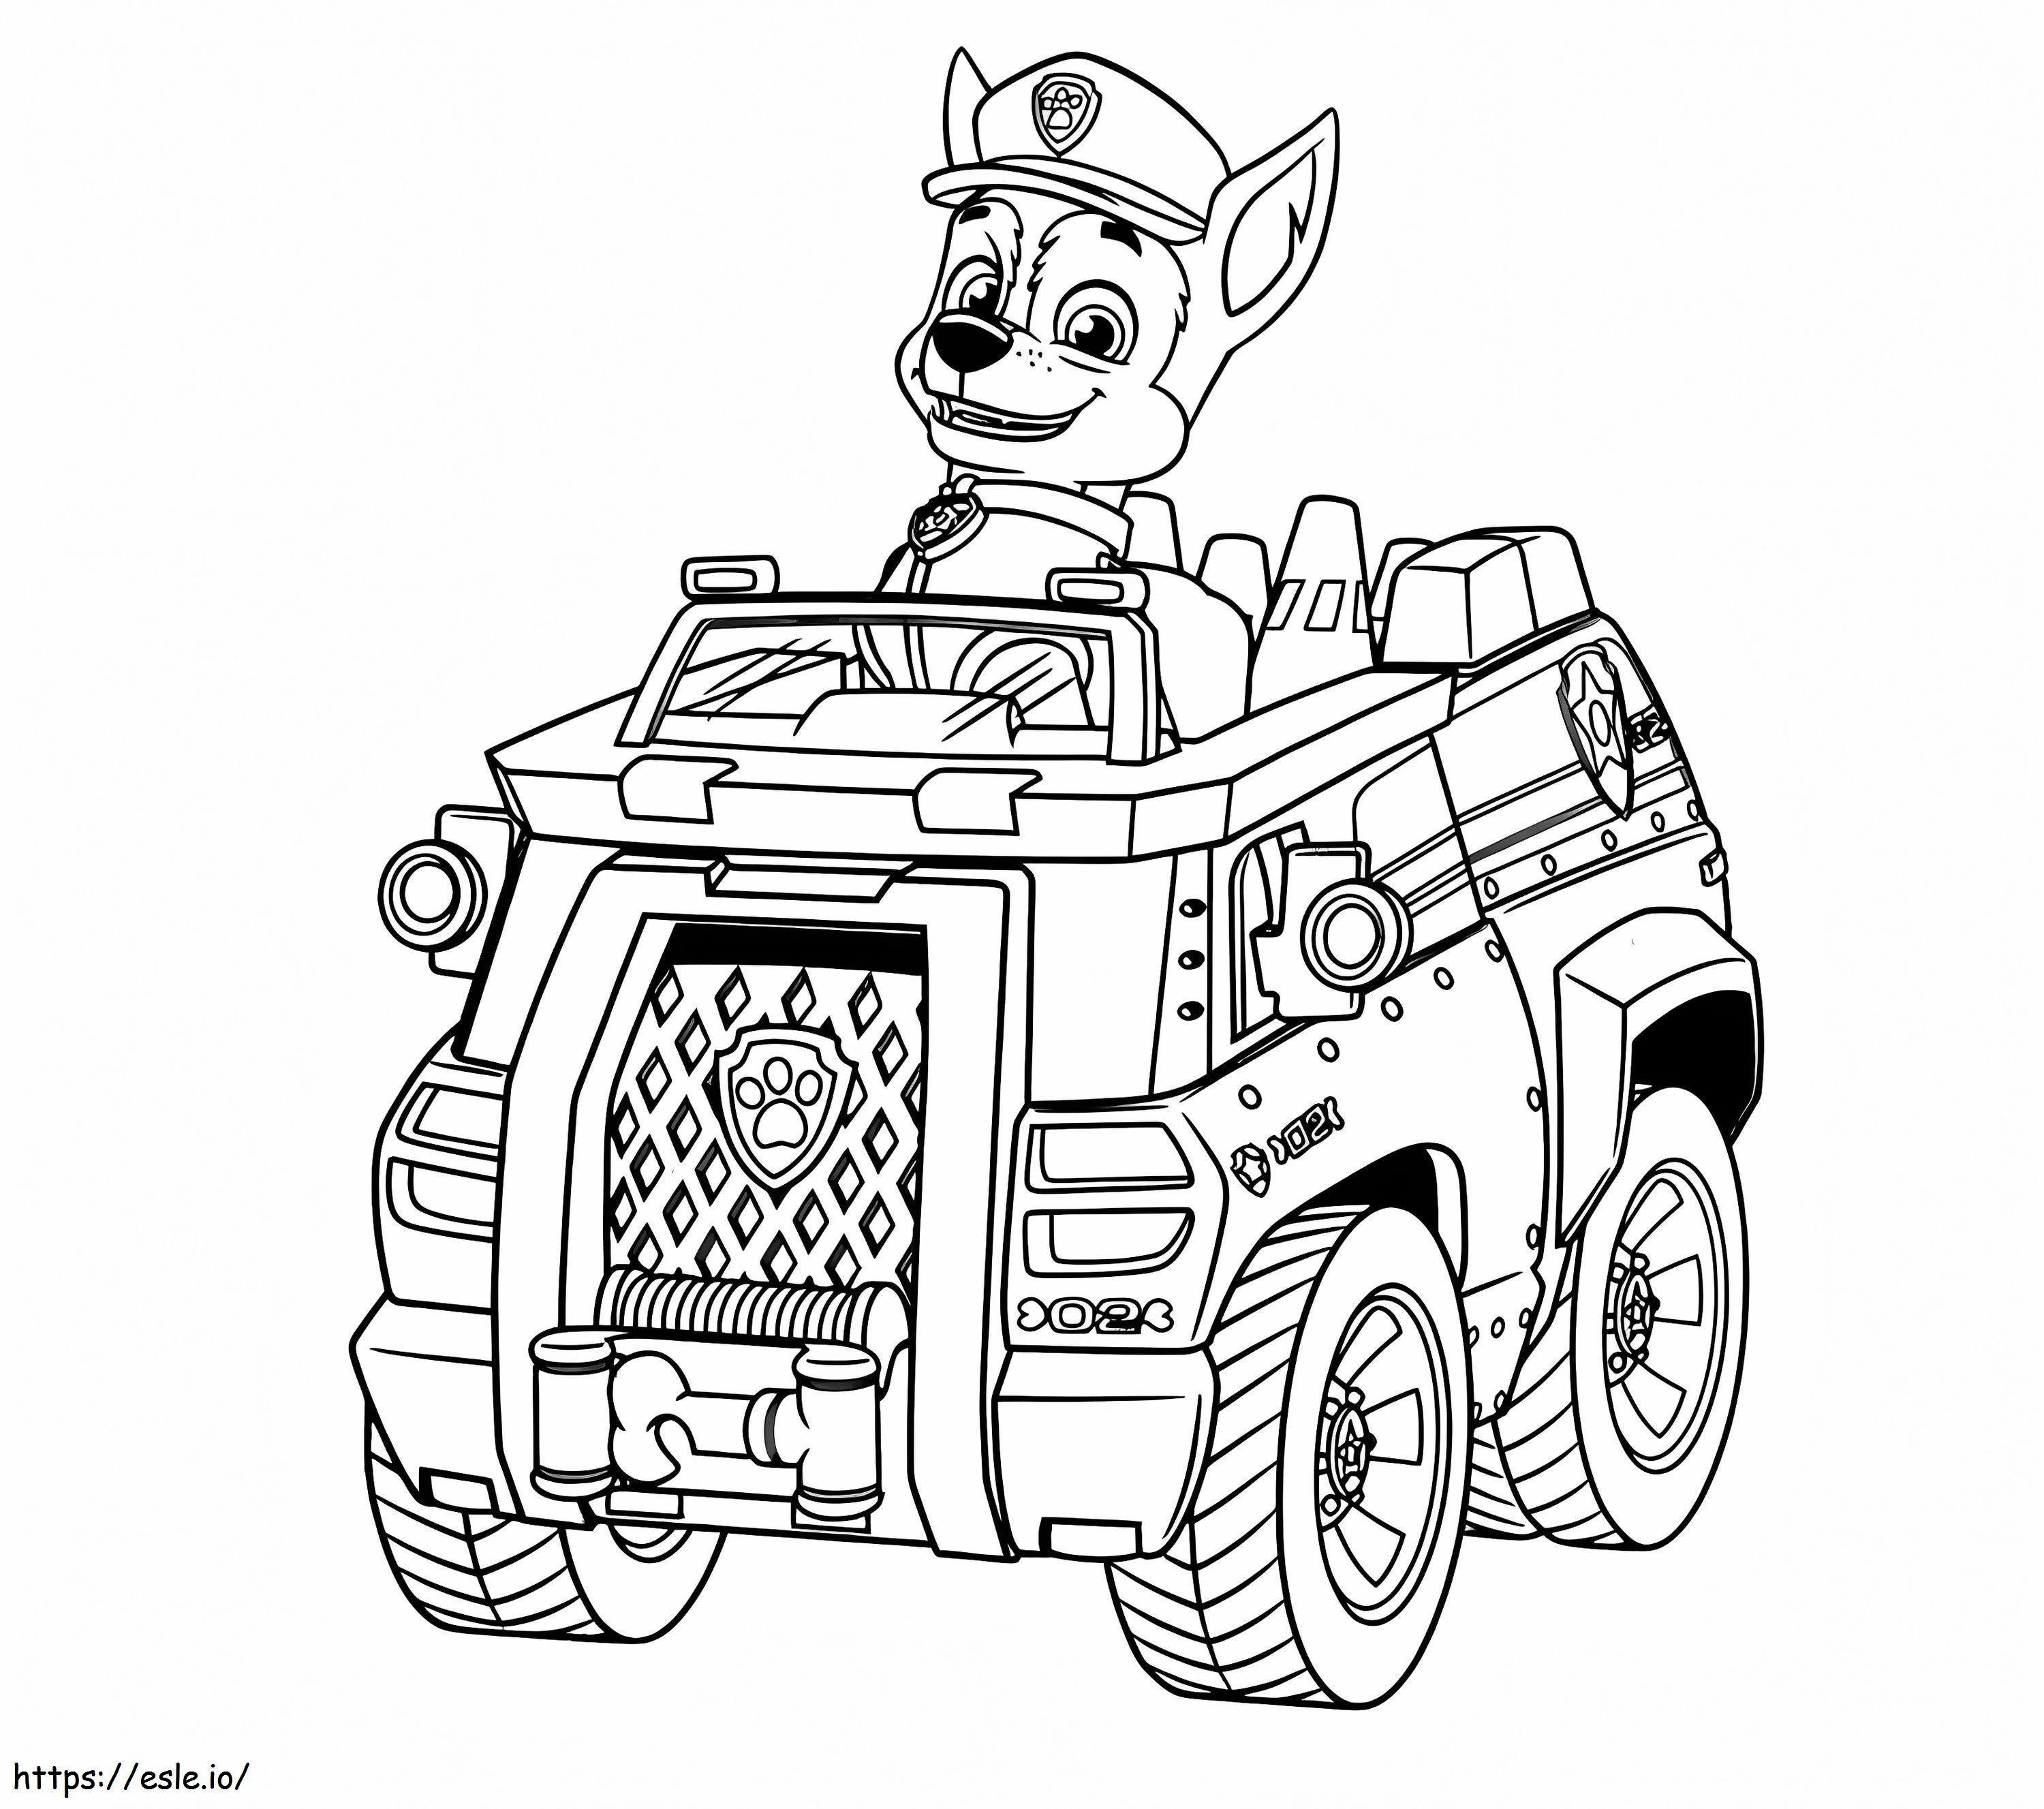 Chase Paw Patrol 2 coloring page